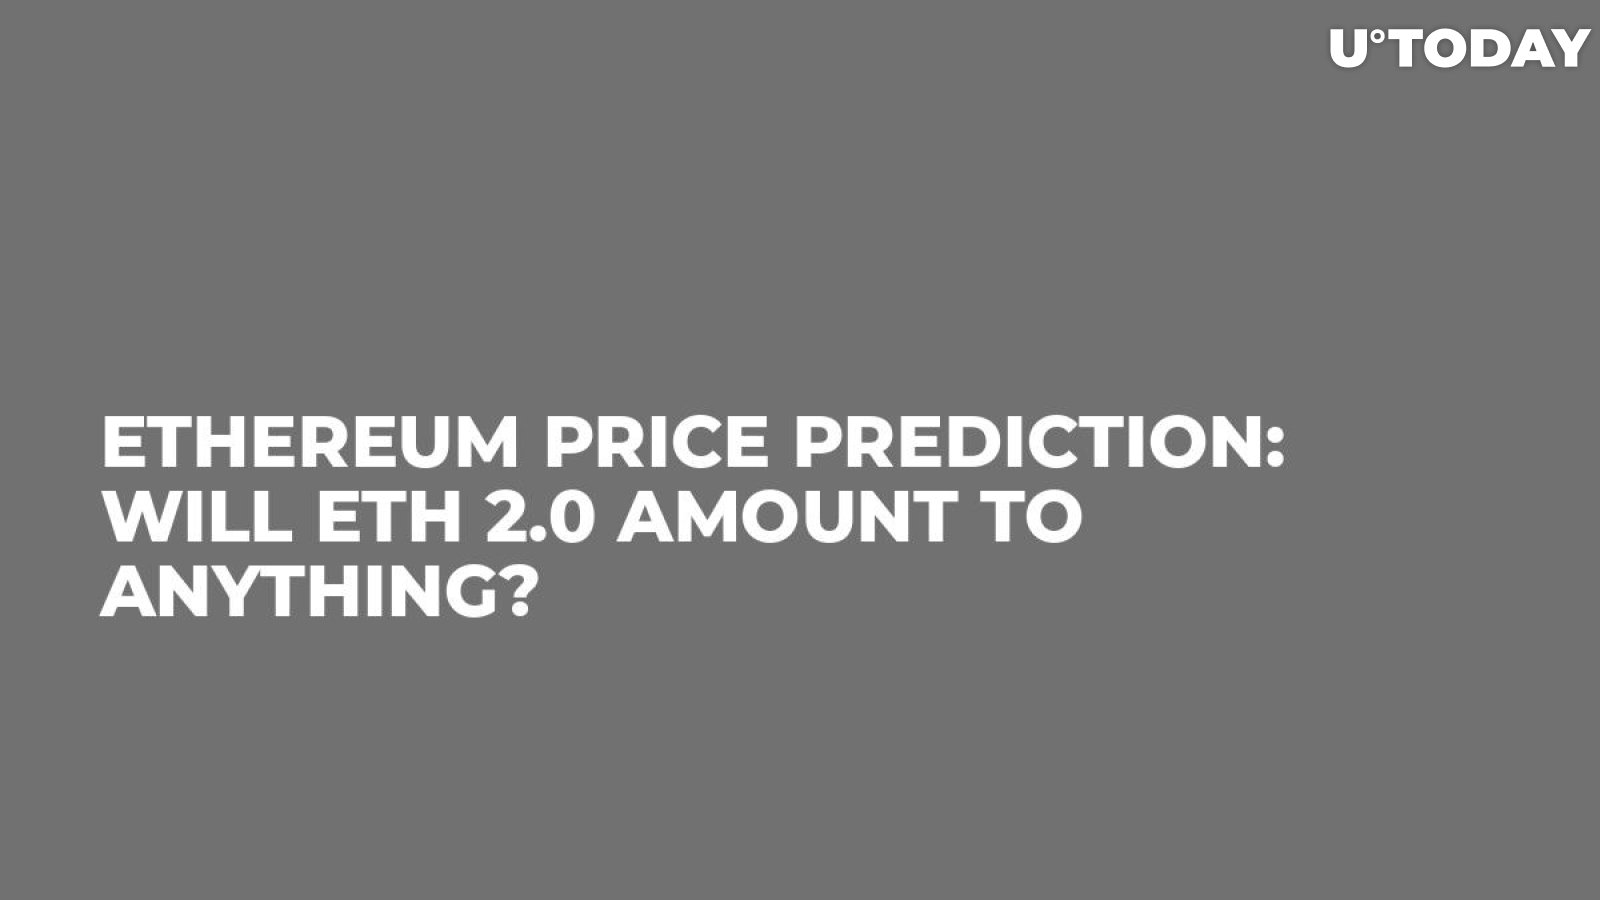 Ethereum Price Prediction: Will ETH 2.0 Amount to Anything?